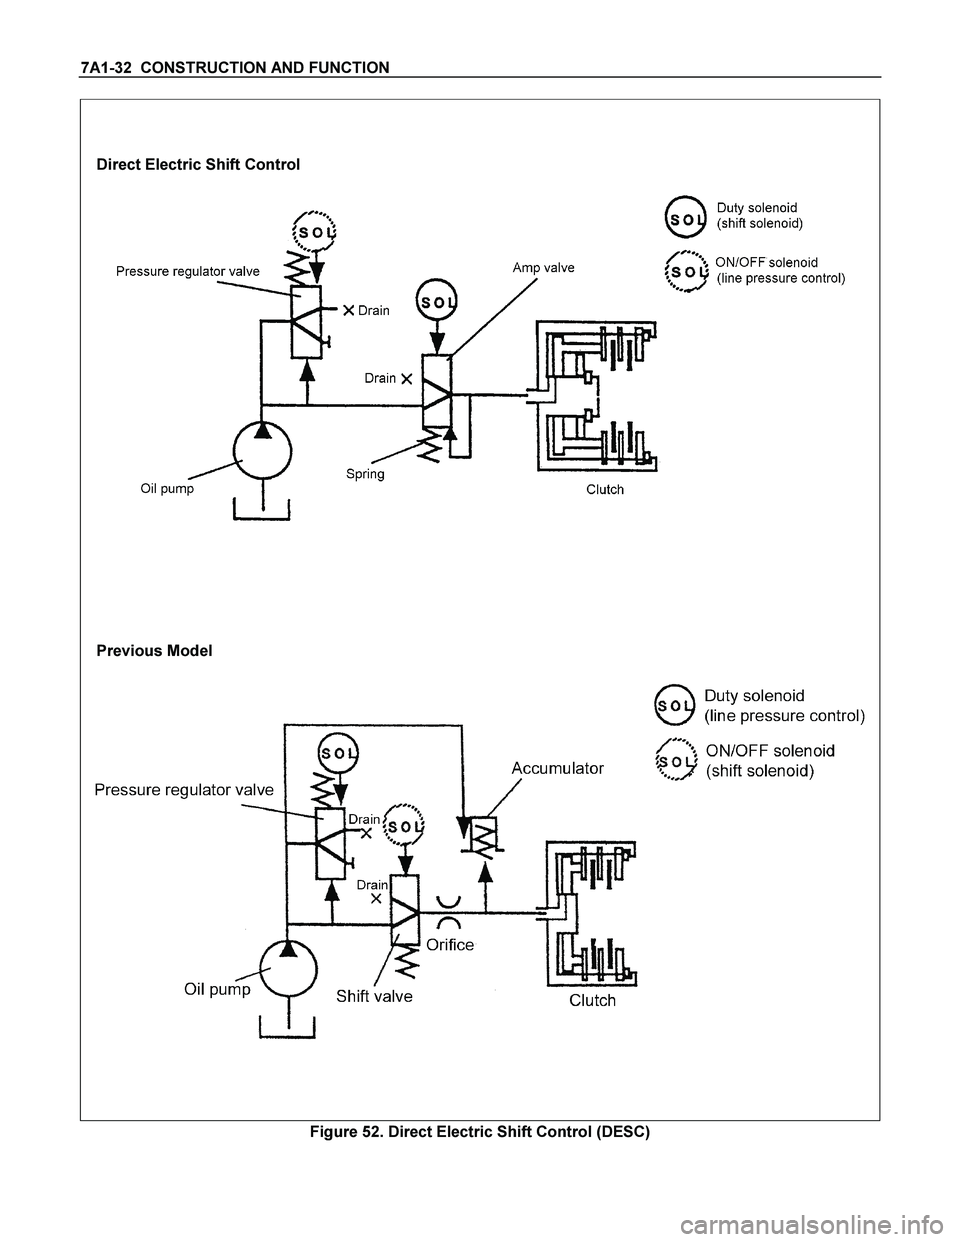 ISUZU TF SERIES 2004  Workshop Manual 7A1-32  CONSTRUCTION AND FUNCTION 
  
 
 
Direct Electric Shift Control 
 
 
 
 
 
 
 
 
 
Previous Model 
 
 
Figure 52. Direct Electric Shift Control (DESC)  